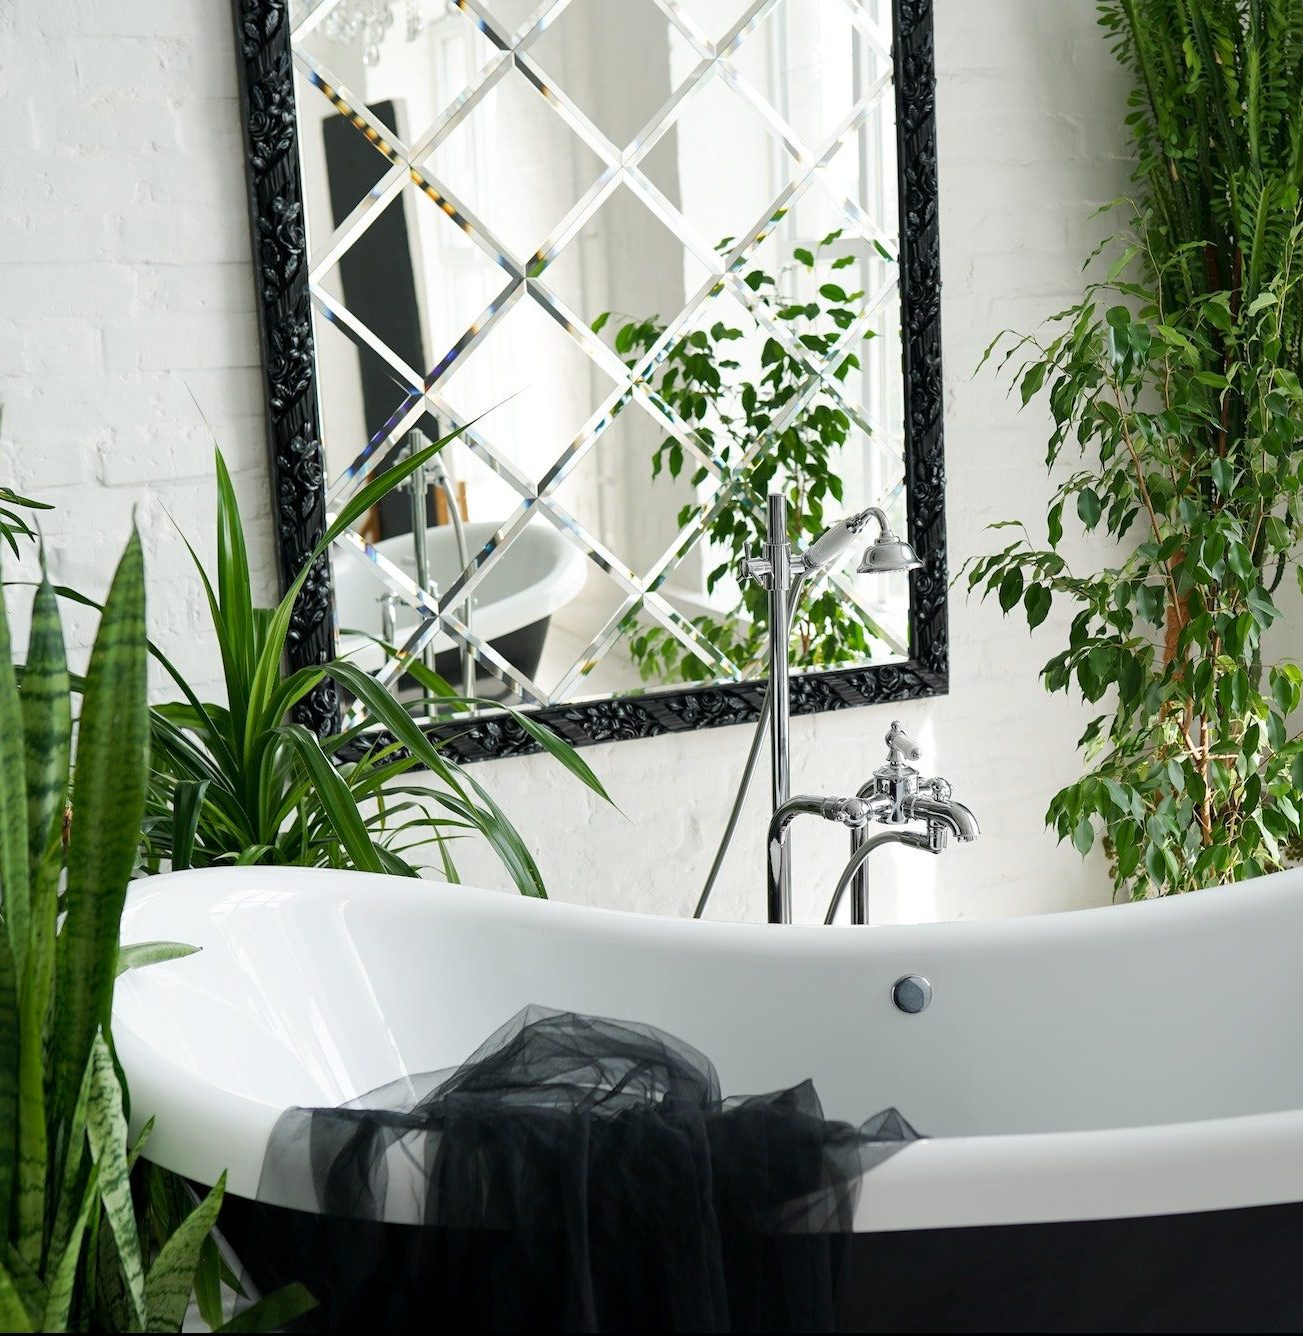 Bathtub and green plants in bathroom interior in luxury home